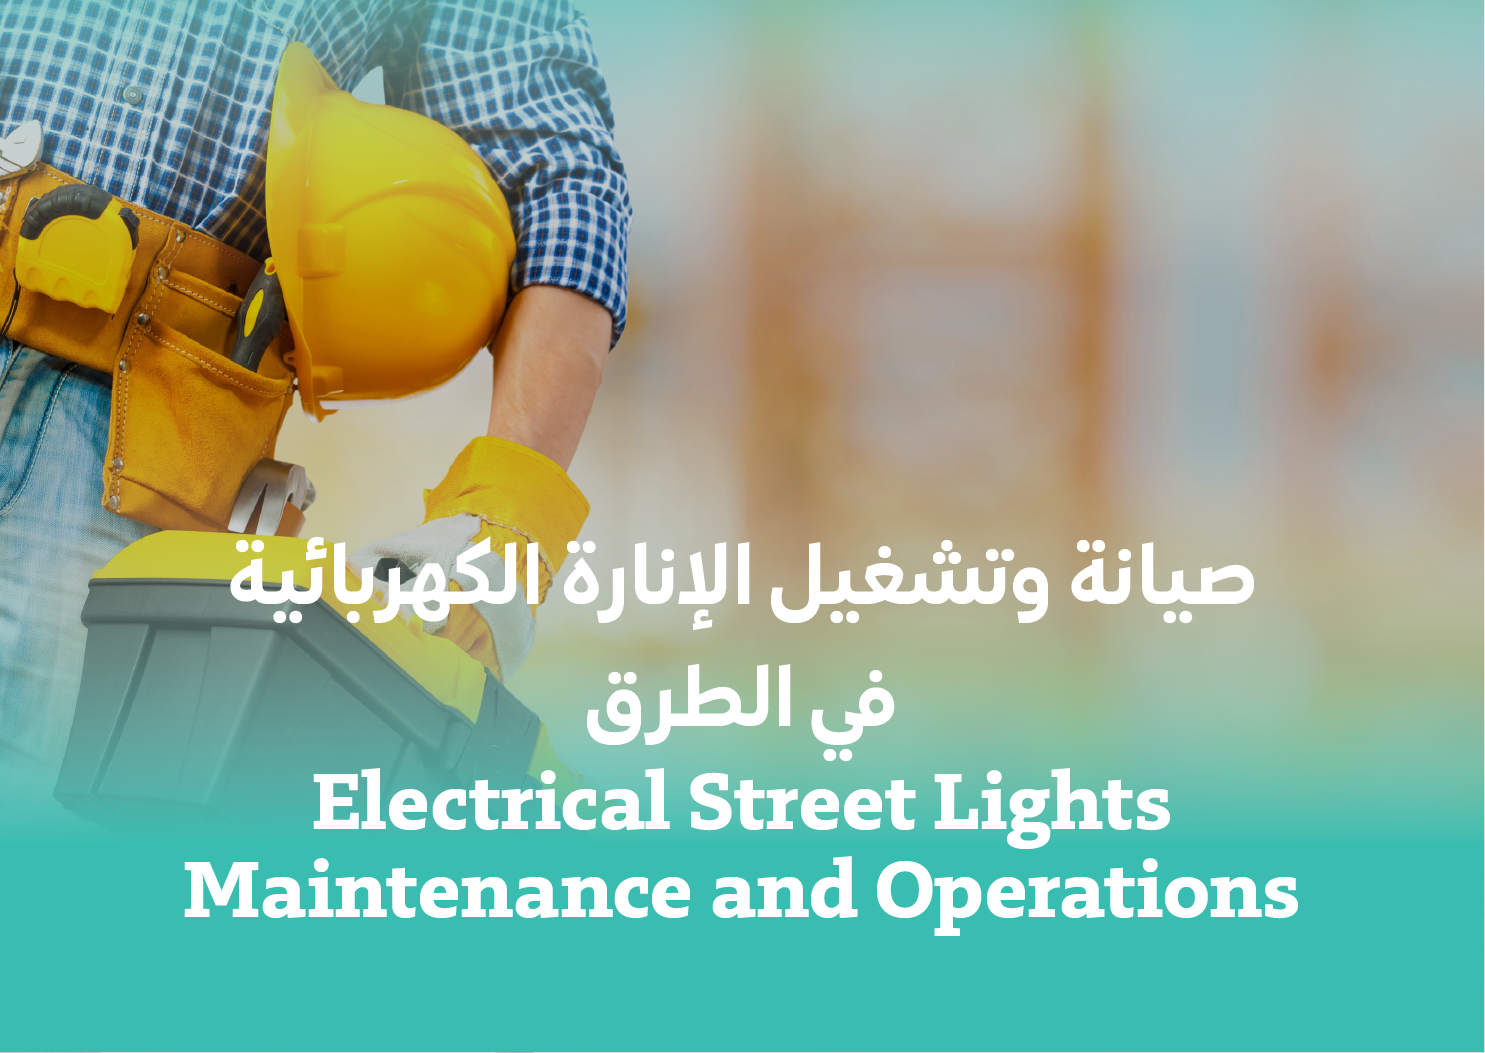 Electrical Street Lights Maintenance and Operations 